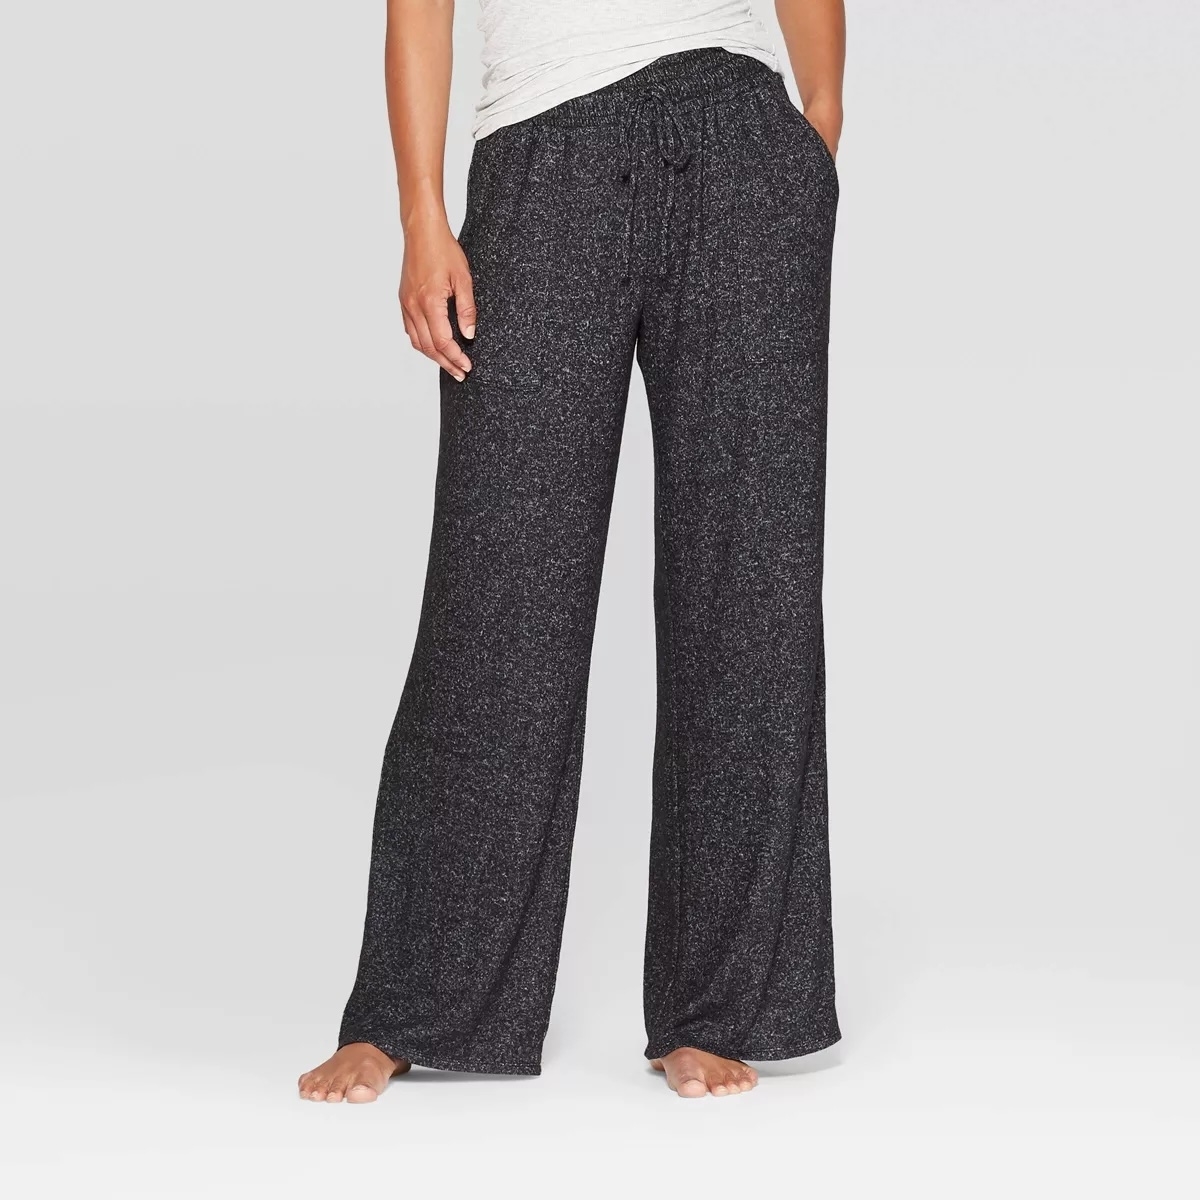 Person modeling loose-fitting, casual black speckled pants suitable for leisure or shopping